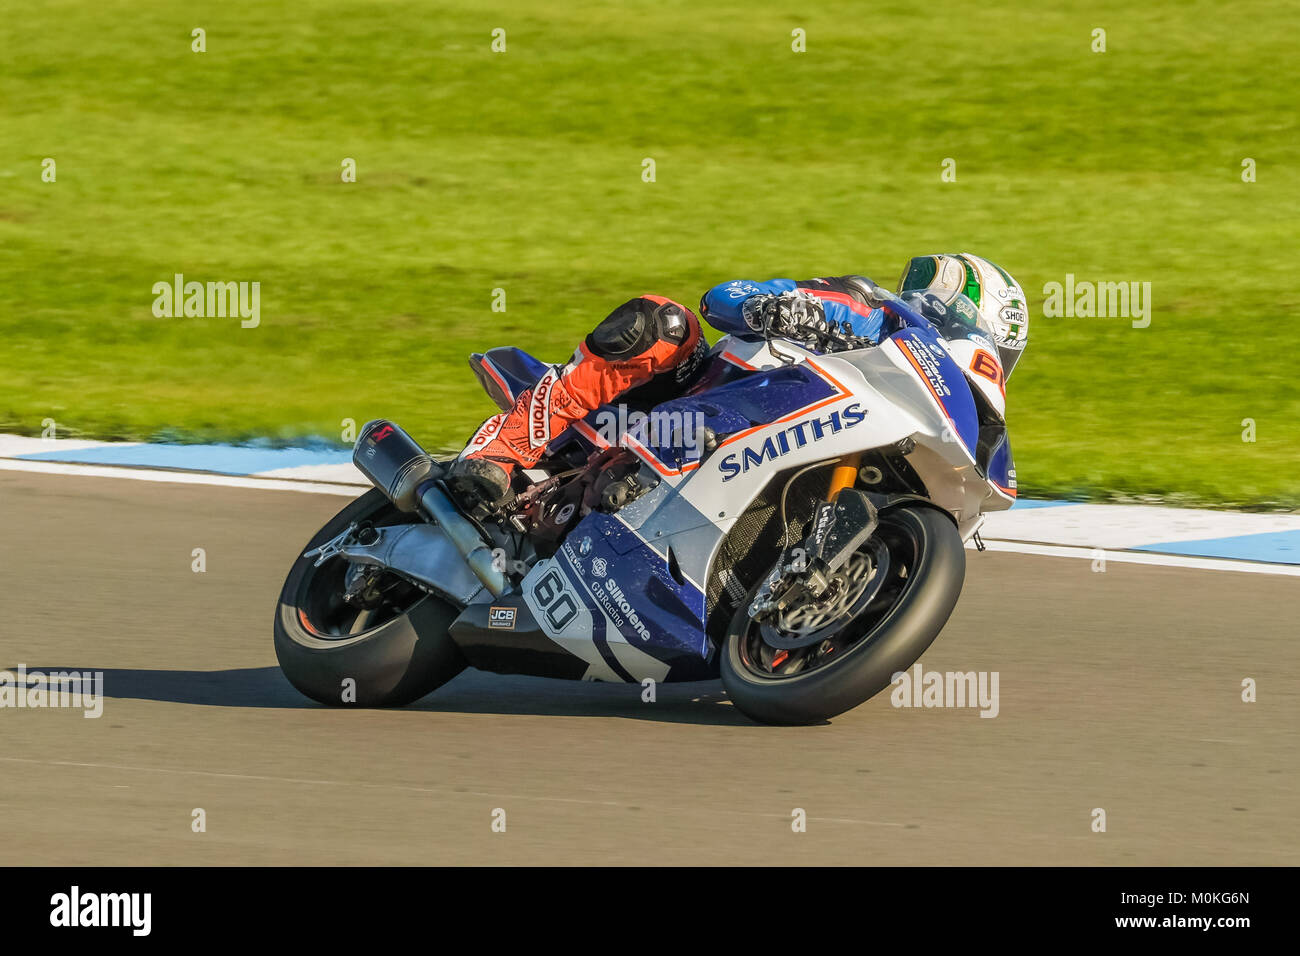 Peter Hickman on the Smiths Racing BMW at the British Superbike Meeting at Donington Park, Castle Donnington, Leicestershire, England in April 2017 Stock Photo